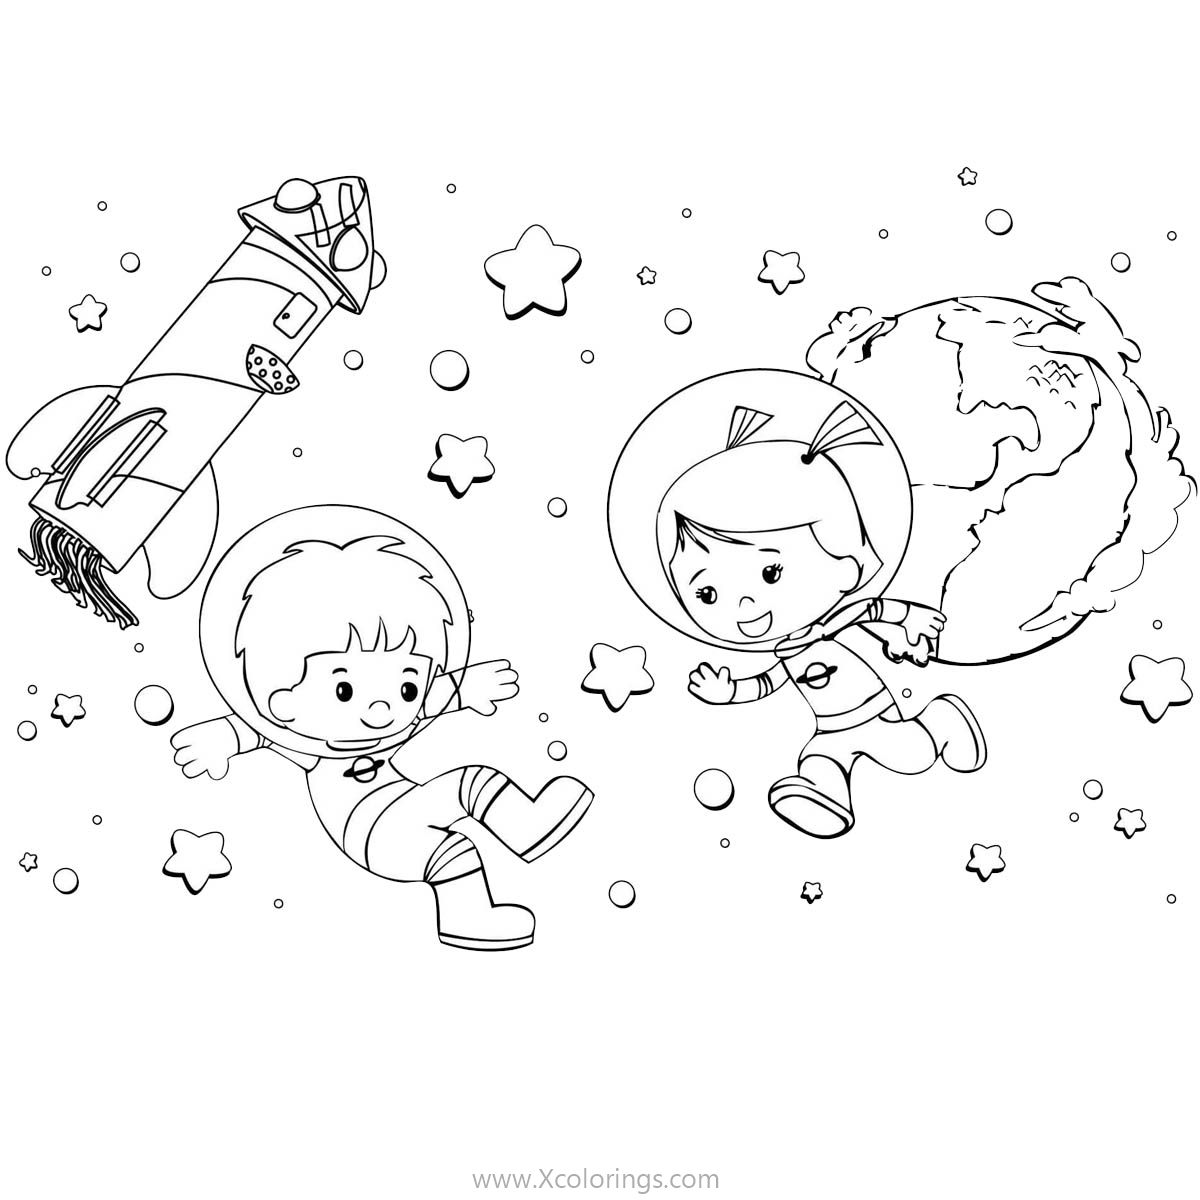 Free Astronaut Boy and Girl Coloring Pages printable